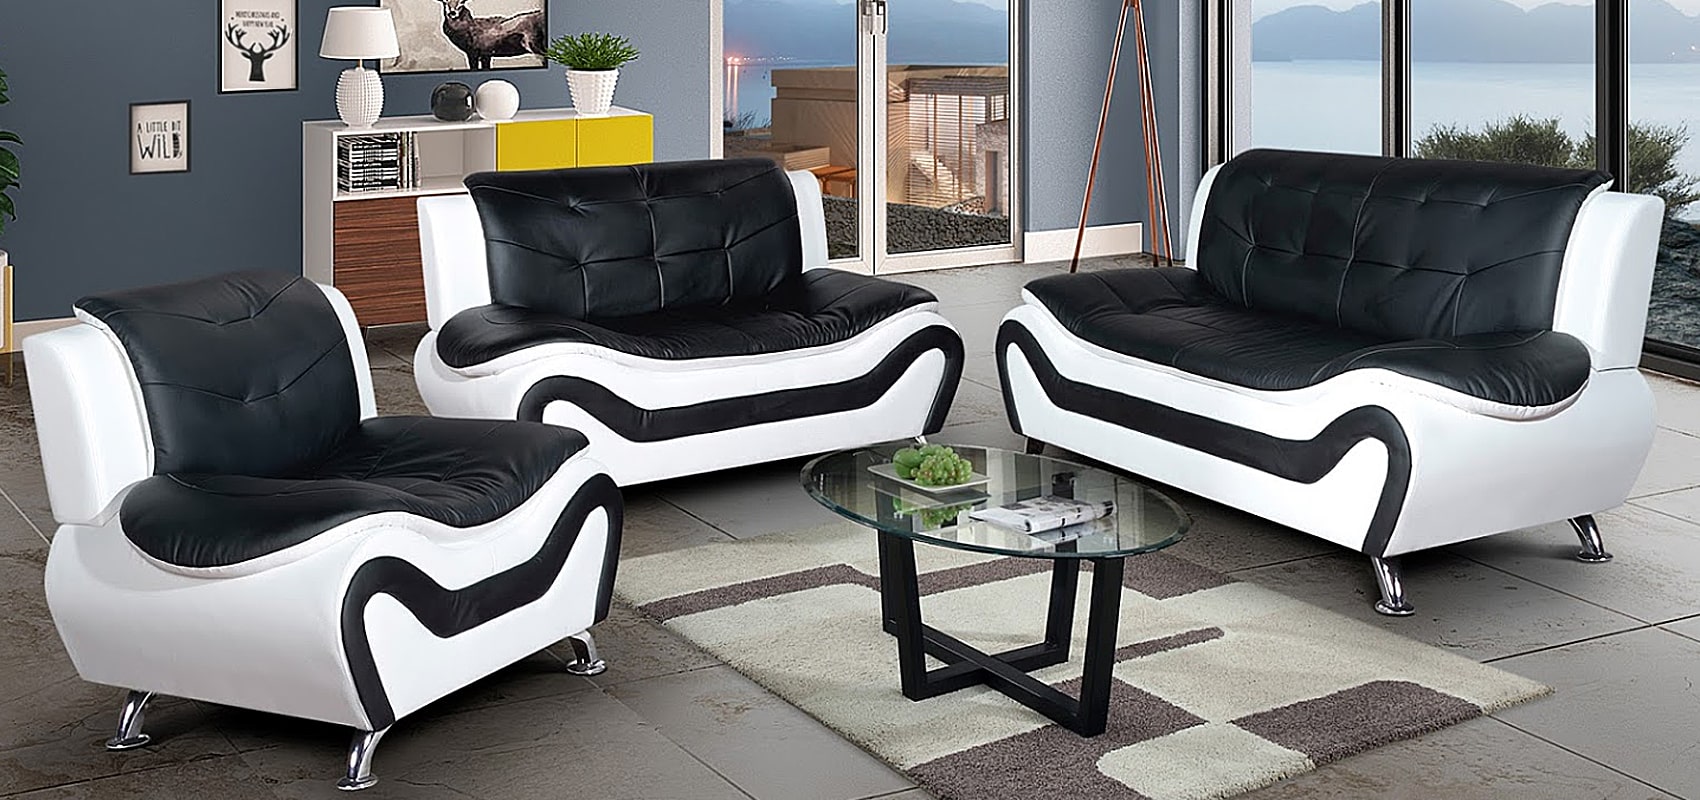 White and Black Couch | White and Black Sofa | Black and white Sofa | Black and White Couch